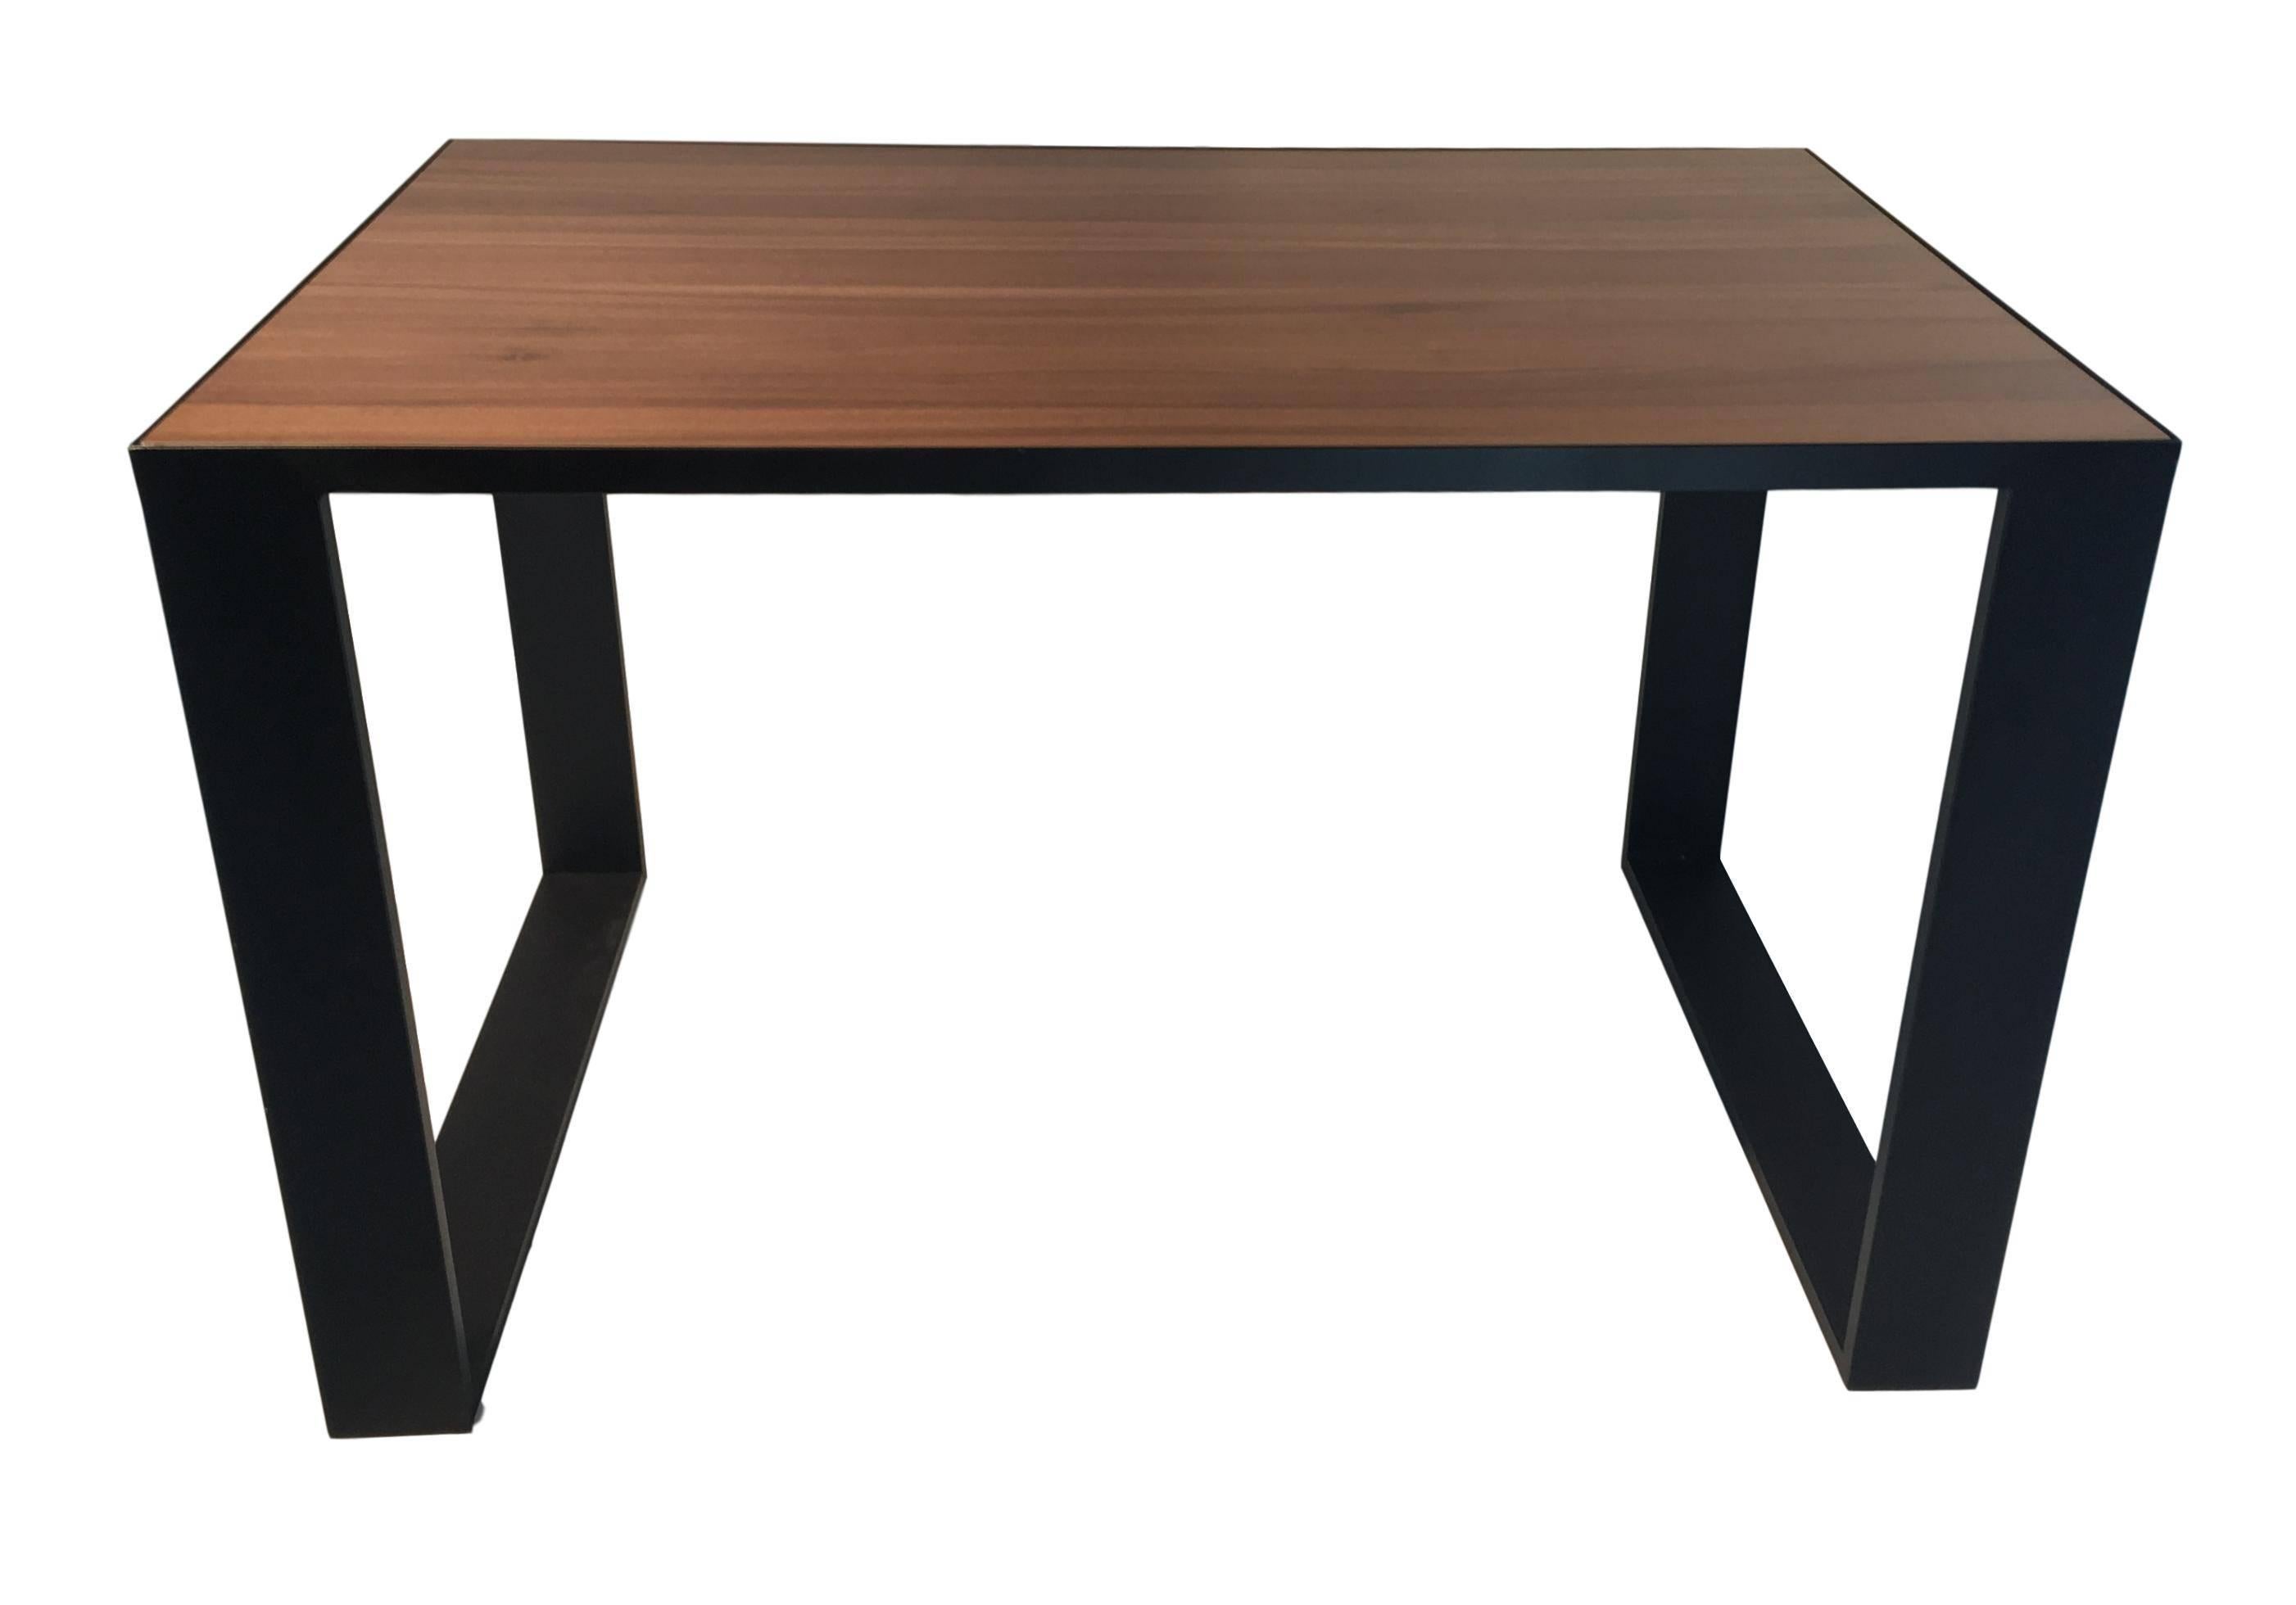 Rectangular iron cube table with embedded wood top, dinner table, desk table 

Frame material: Extruded and hand-welded iron rods
Frame finish: Black 
Iron rods dimensions: 3.93 in x 0.78 in
Top: 0.7 in wood


Bespoke and handmade, available